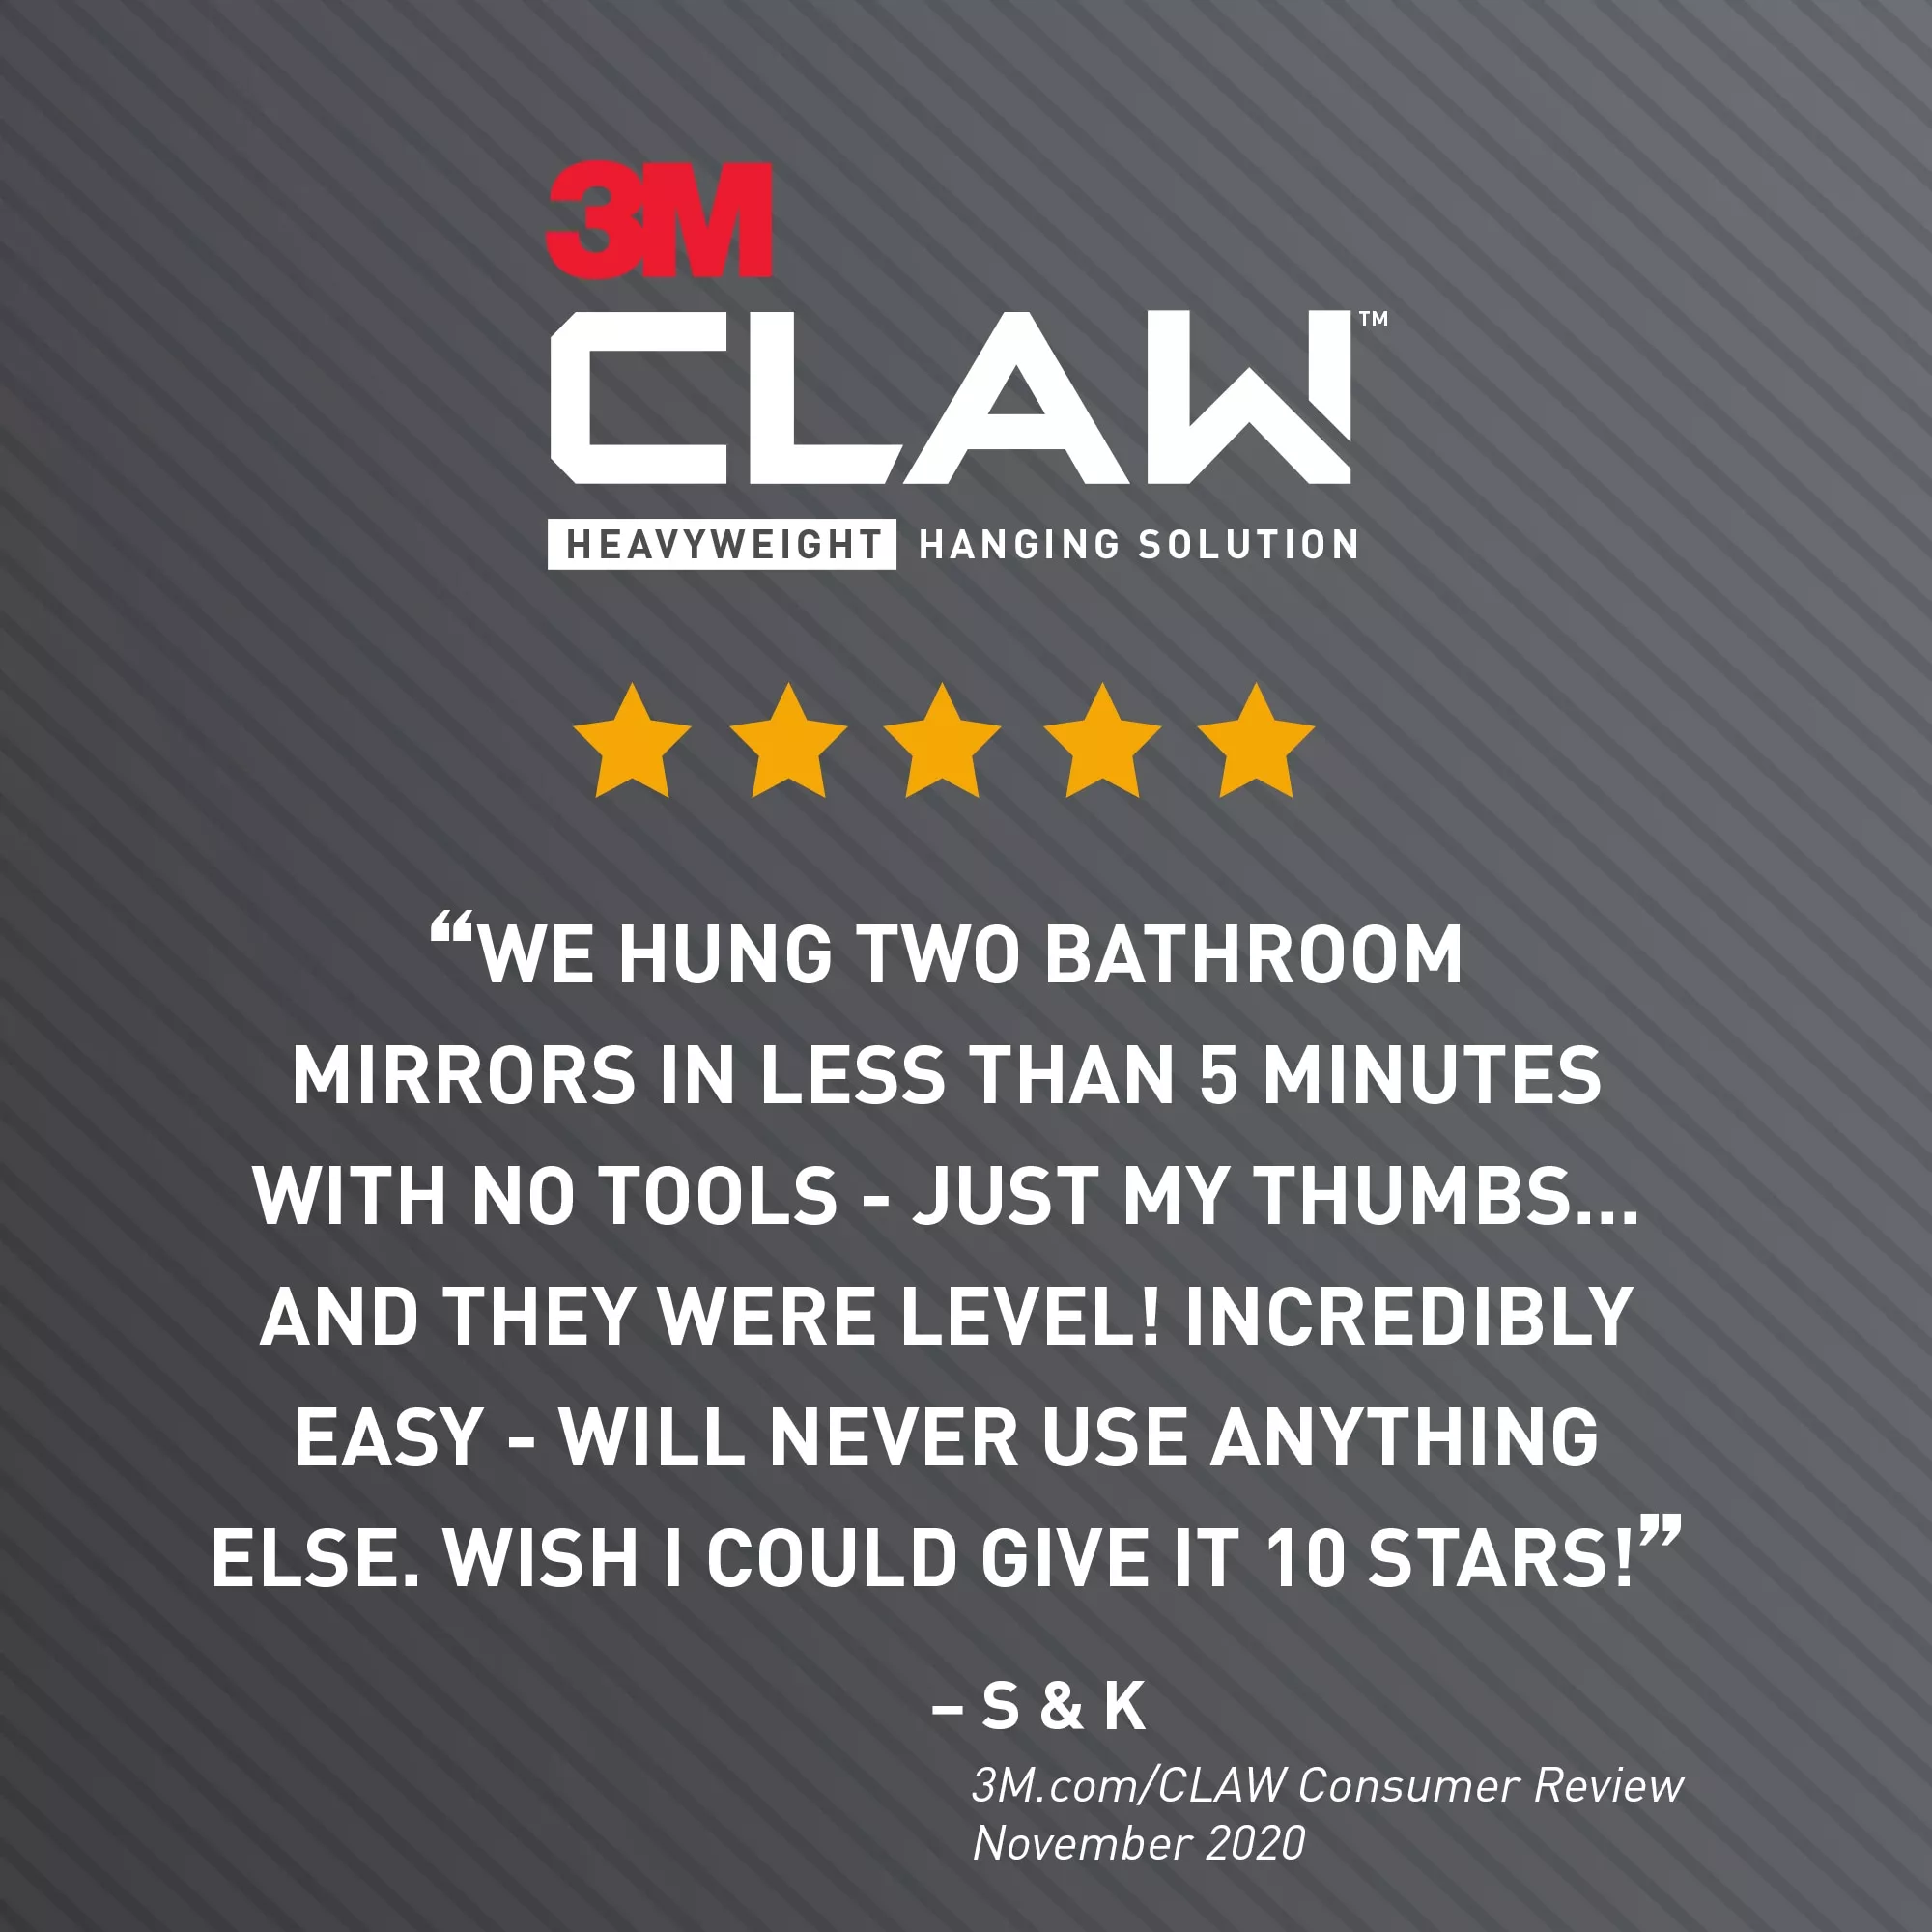 SKU 7100233242 | 3M™ CLAW™ Drywall Picture Hanger 45 lb with Temporary Spot Marker 3PH45M-1ES